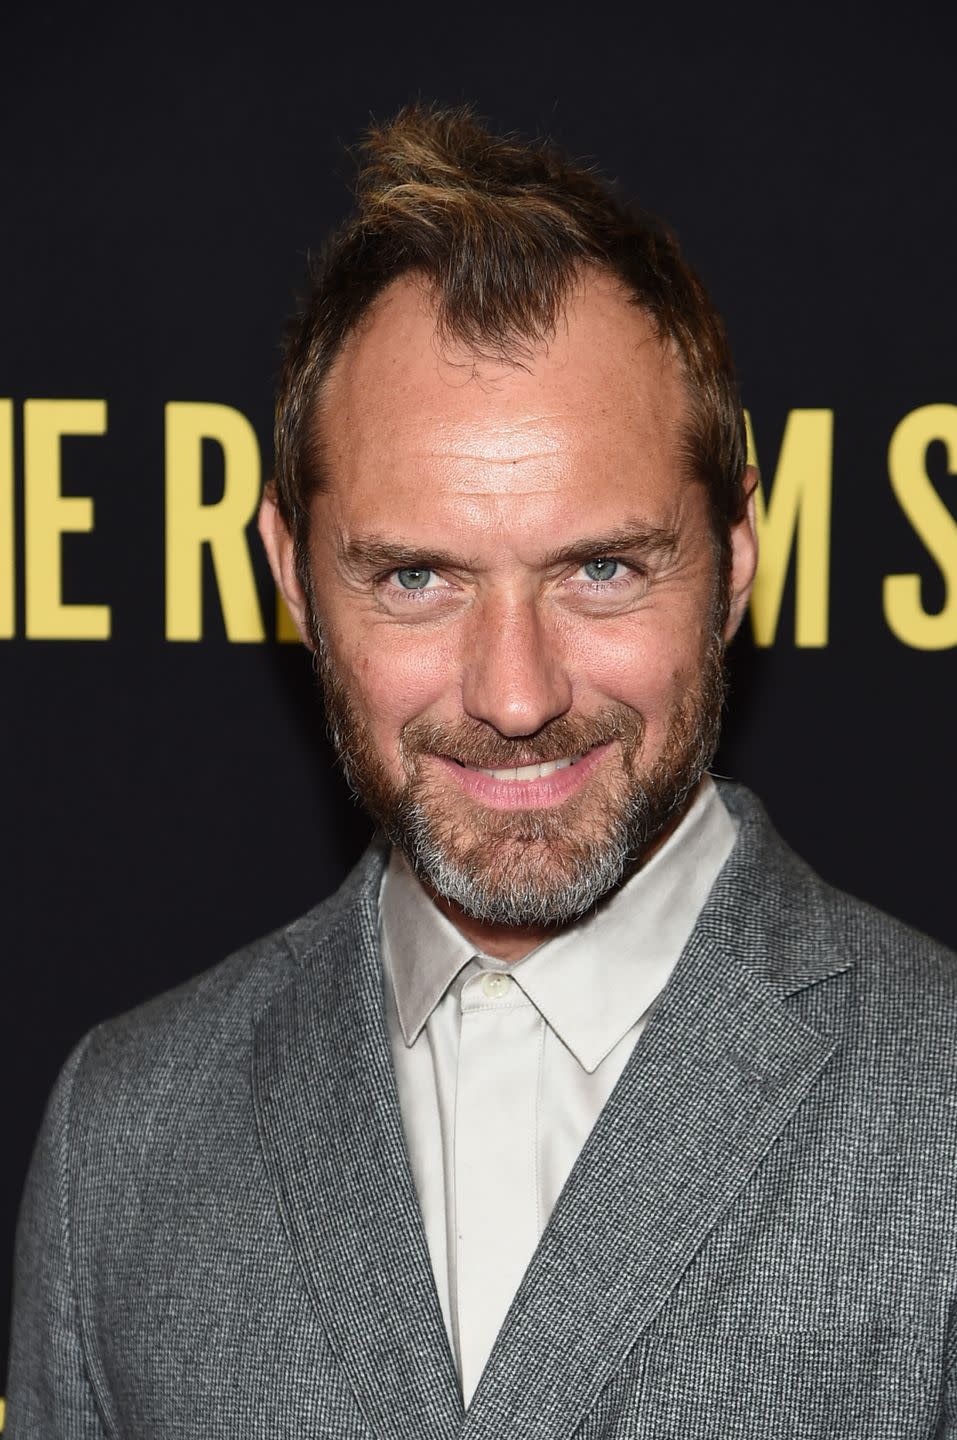 <p>Law’s career has gone from strength-to-strength since his Graham days. He’s starred in blockbuster hits such as Sherlock Holmes, Captain Marvel and Fantastic Beasts: The Crimes of Grindewald.</p><p>In 2017, his series The Young Pope received two Emmy nominations, becoming the first Italian TV series to be up for the gong. He also won an Honorary César in 2007.</p>